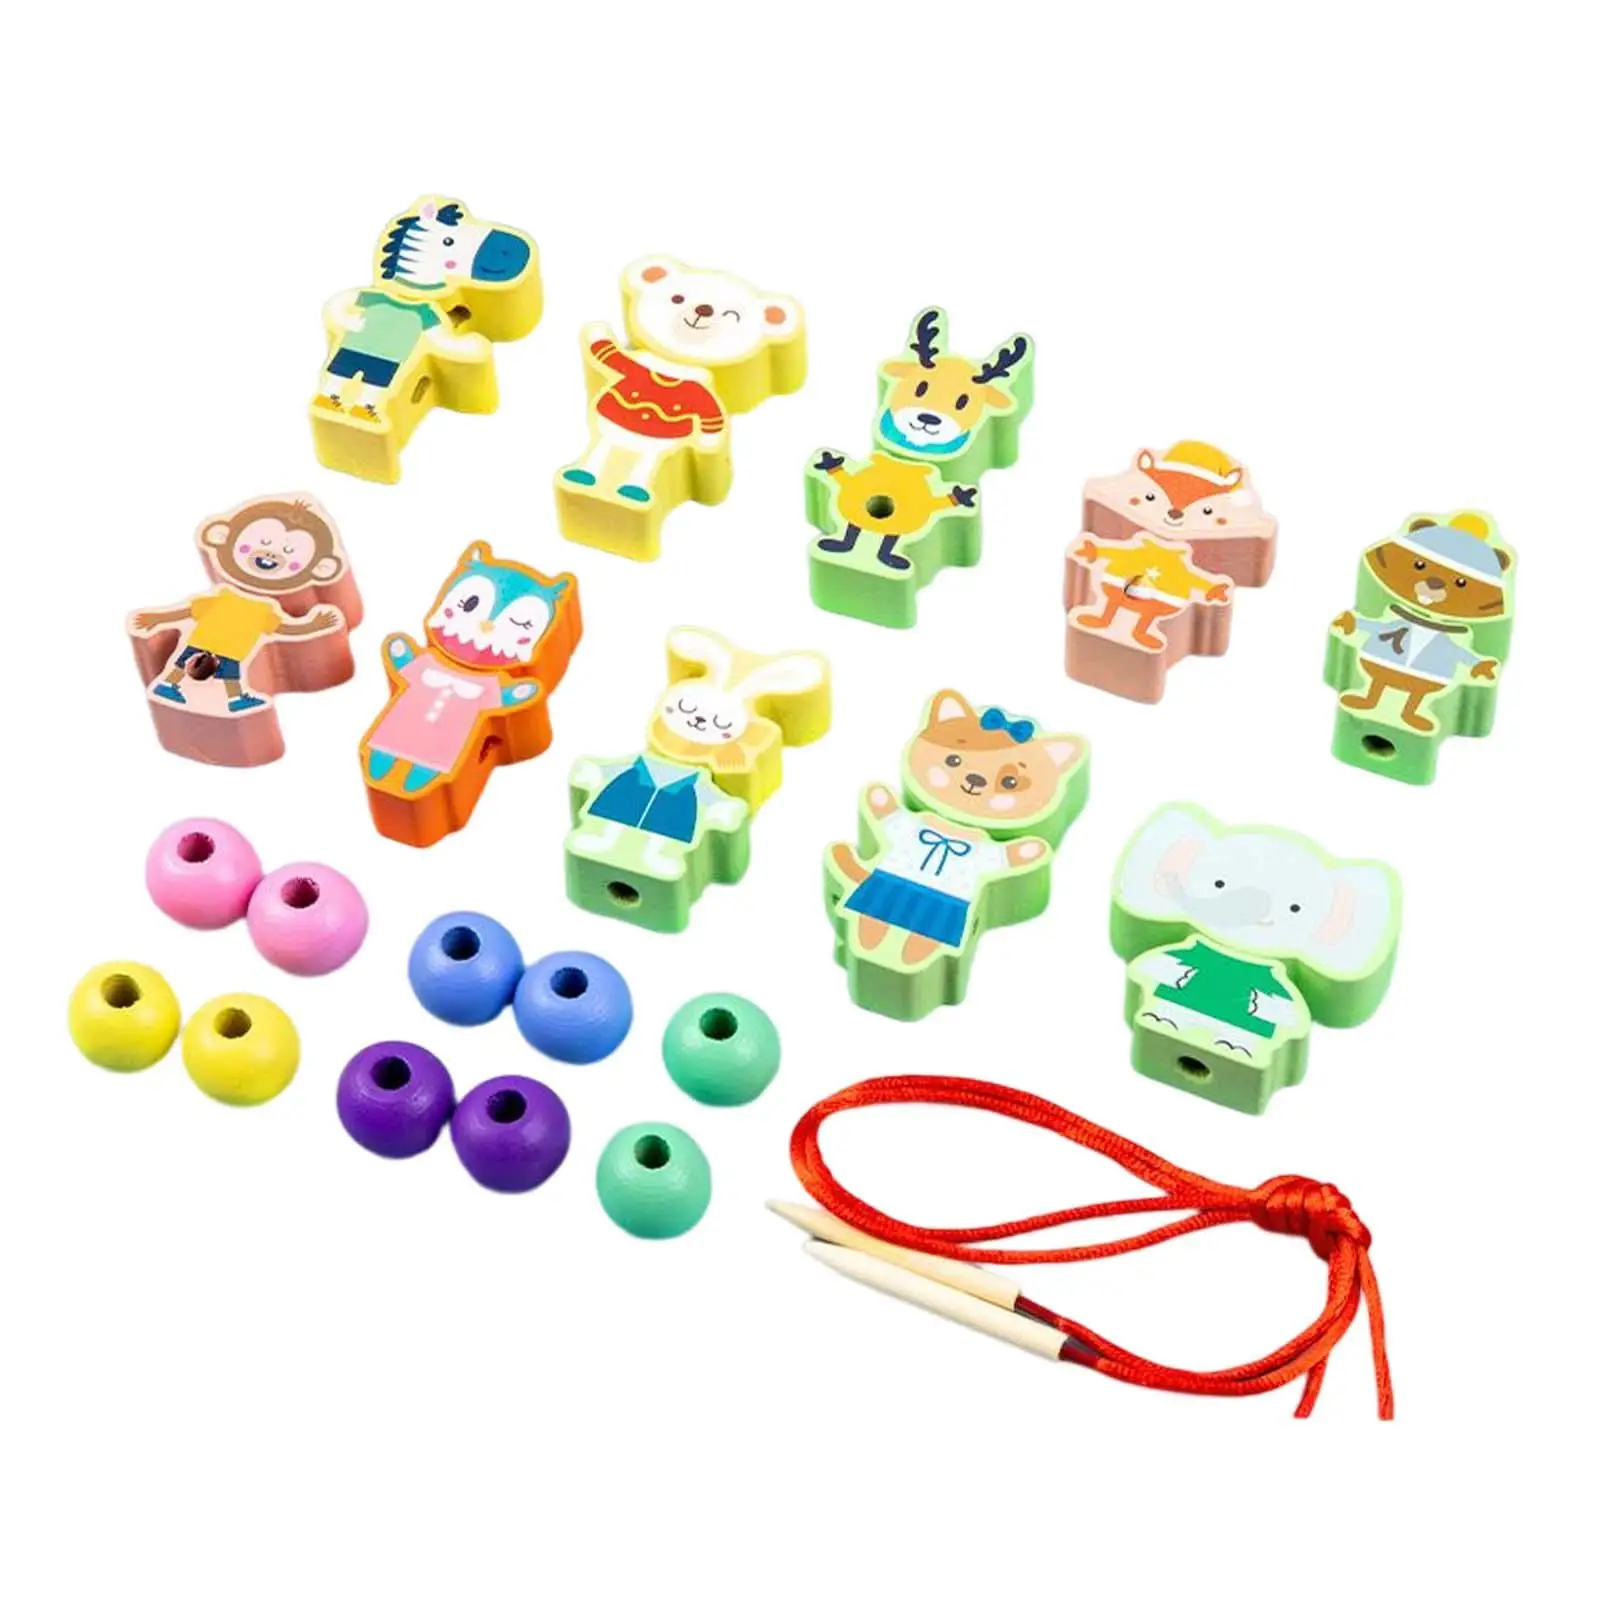 Wooden Lacing Beads Set Developmental Toy 3 Year Old fruits Animal Lacing Beads Preschool Threading Toys for Kids Gift